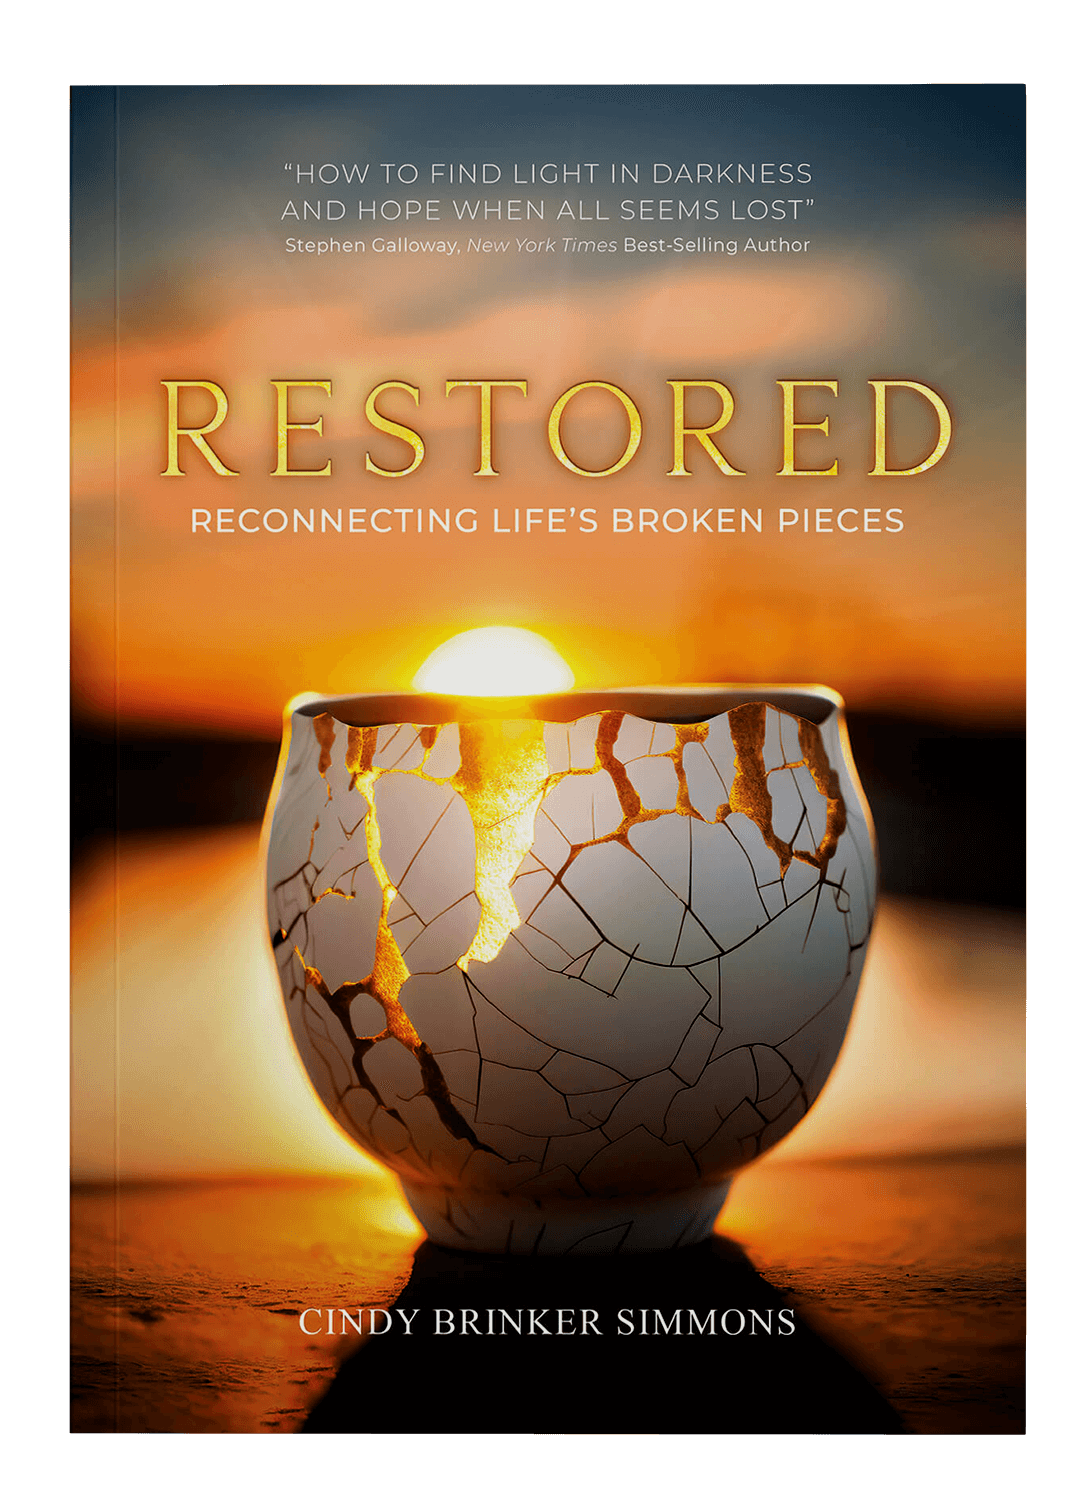 Restored - Reconnecting Life's Broken Pieces by Cindy Brinker Simmons